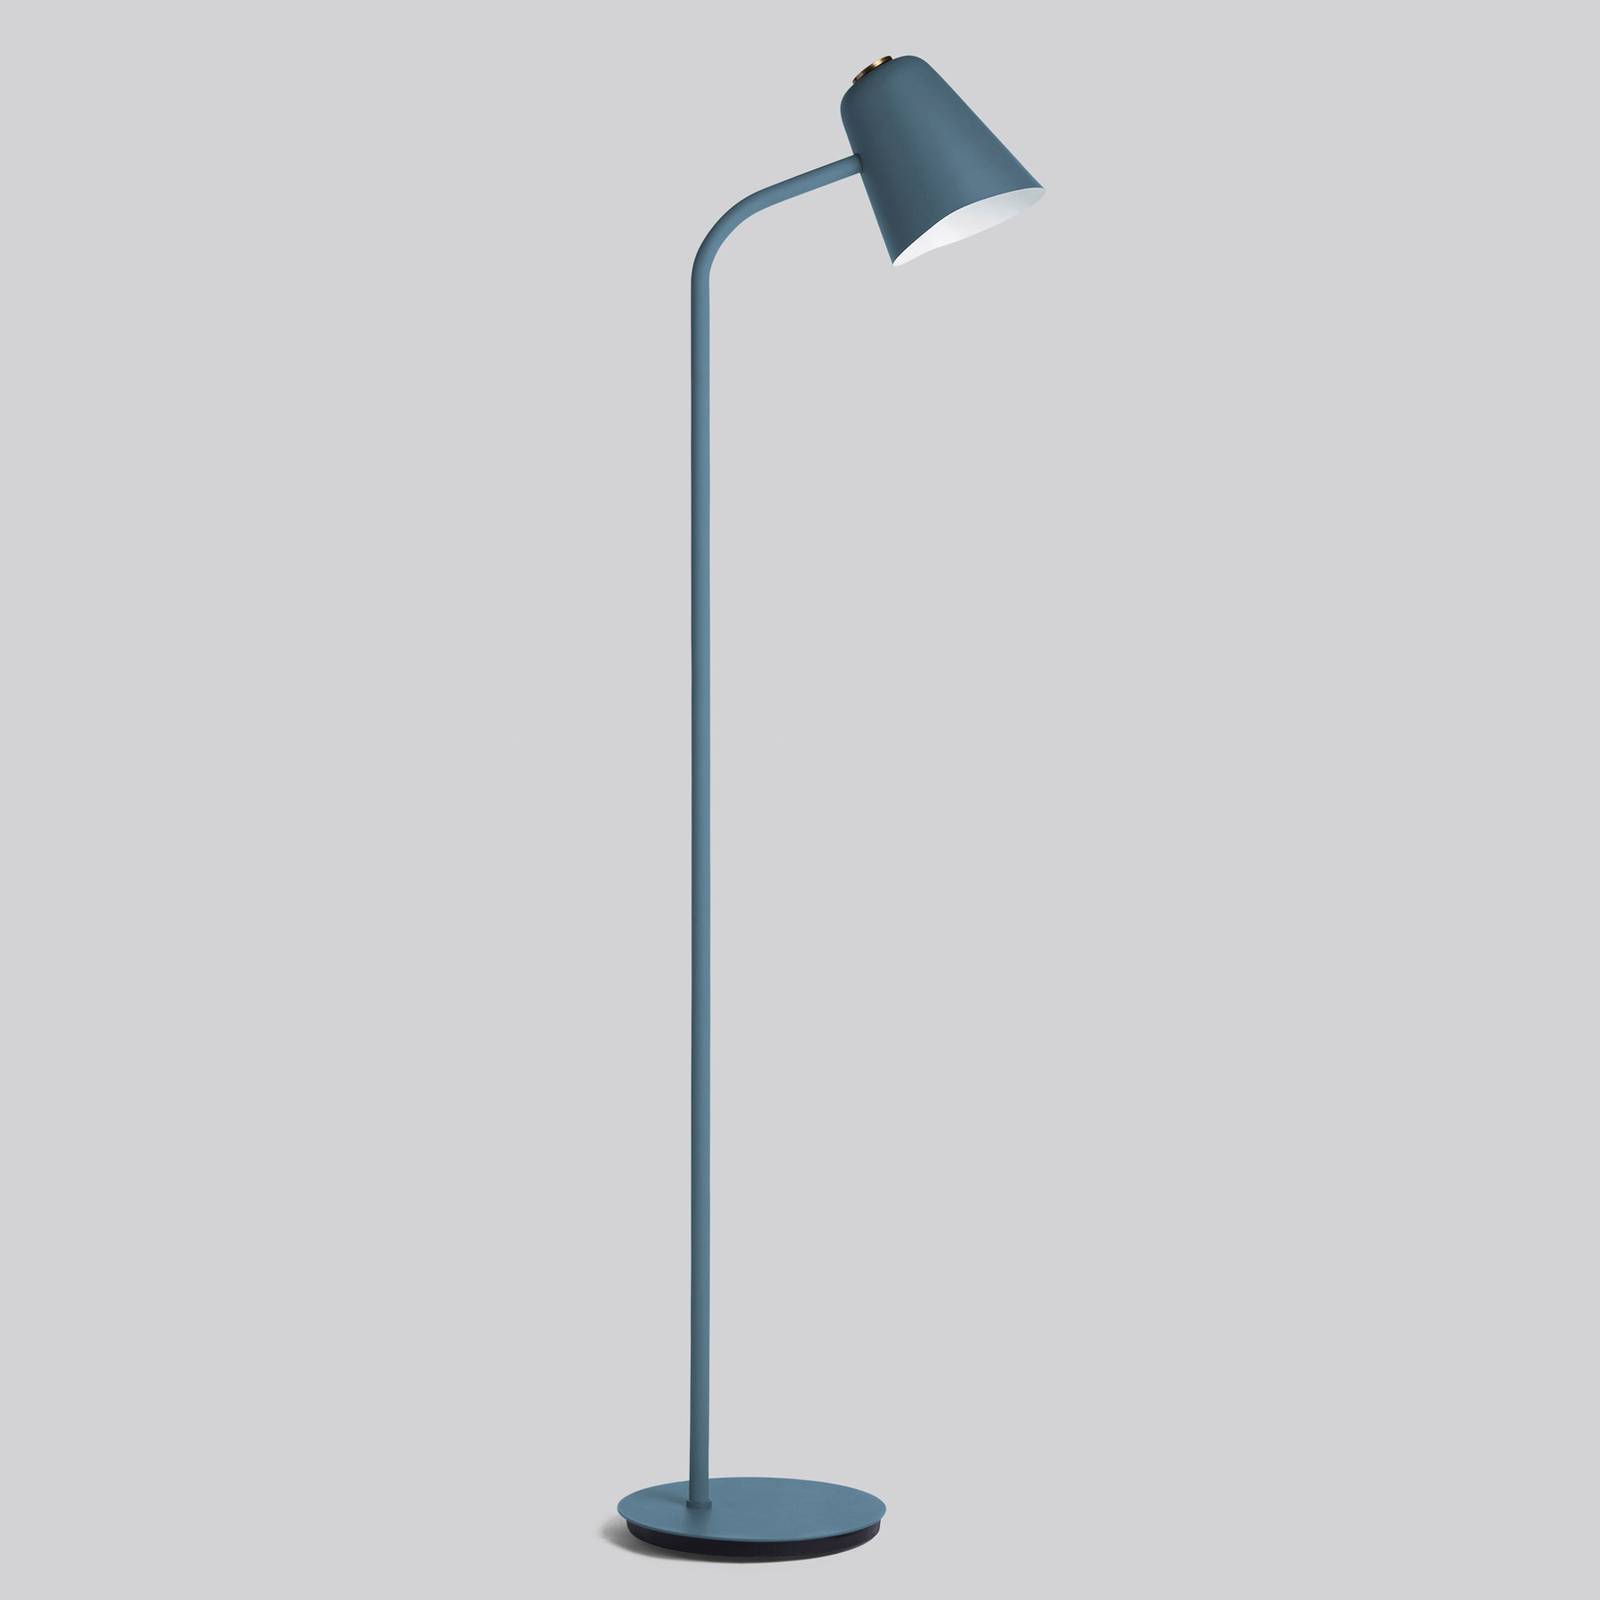 Image of Northern Me dim lampadaire LED dimmable pétrole 7090018216947